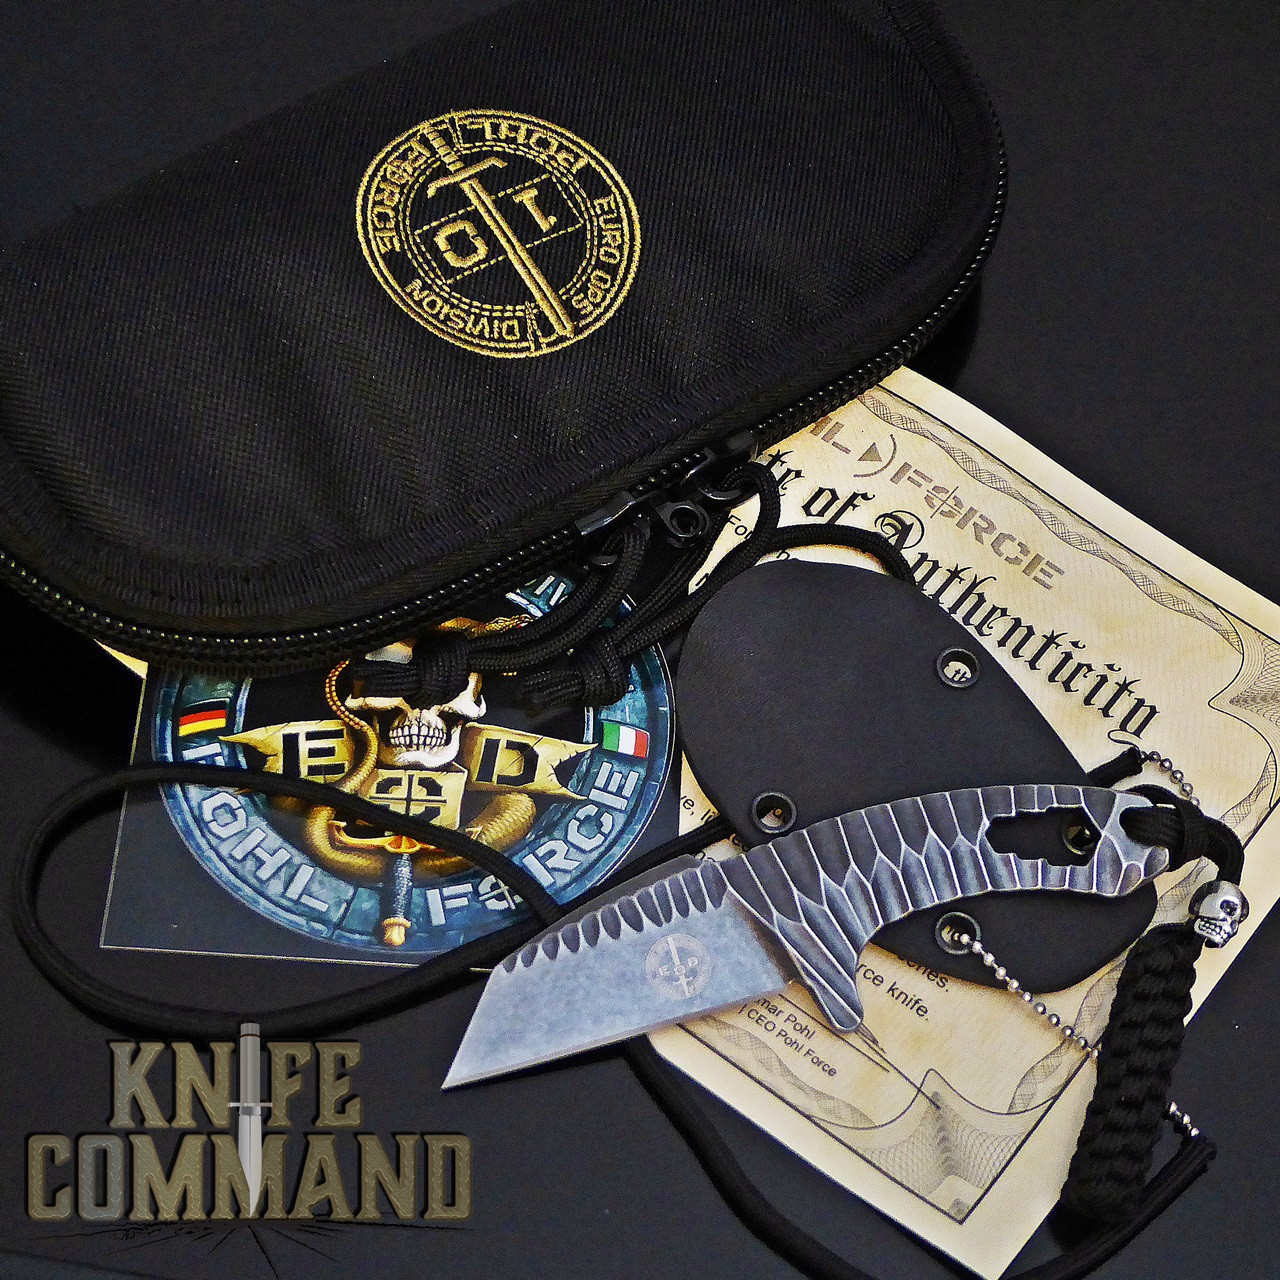 Pouch, sticker, Certificate of Authenticity, knife, sheath, chain, lanyard with skull bead.